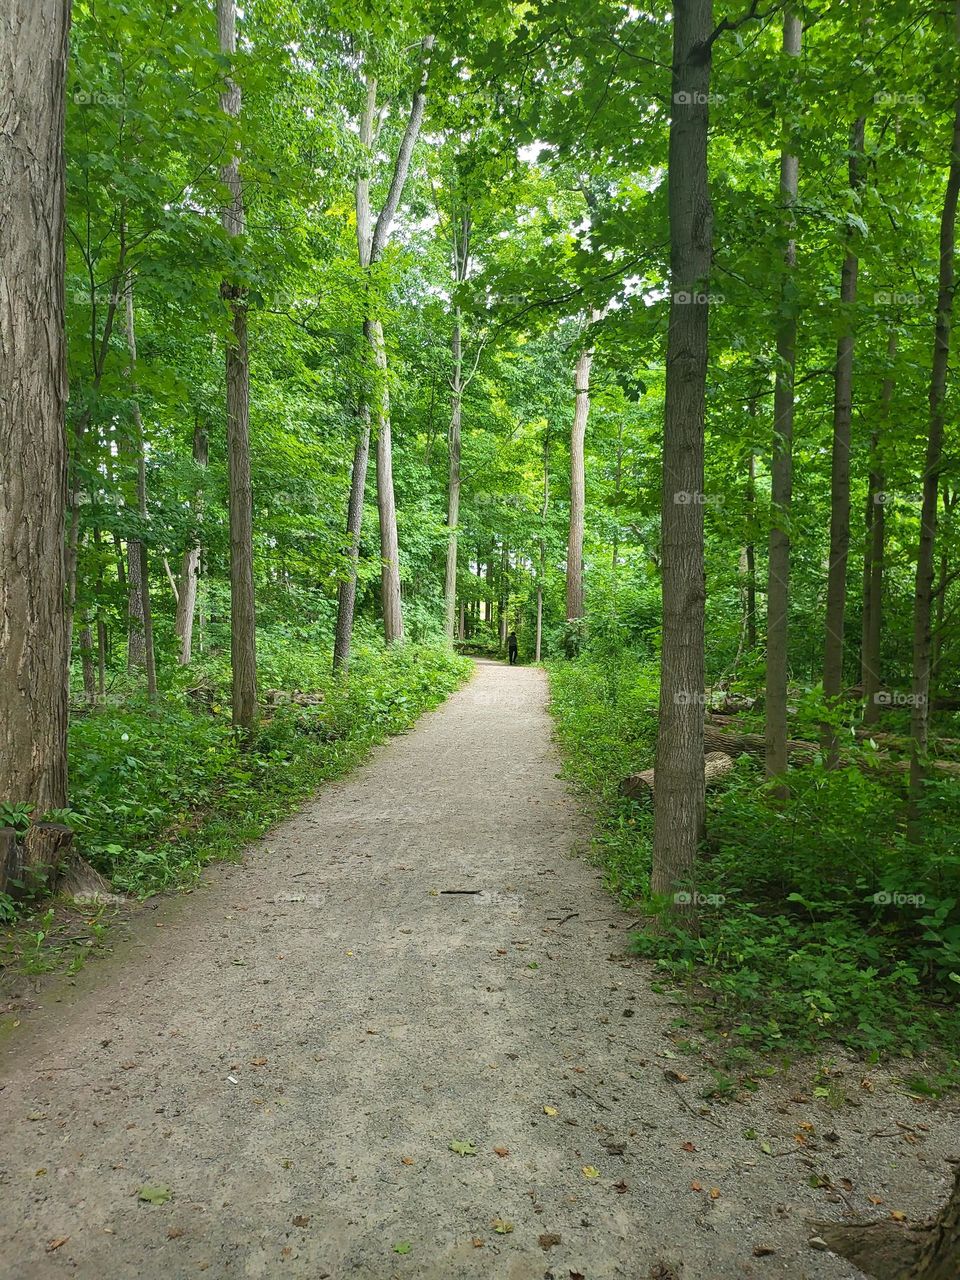 trees, summer, summer trails, greenery, nature, woods, forest, parks, conservation area, summer trips, tall trees